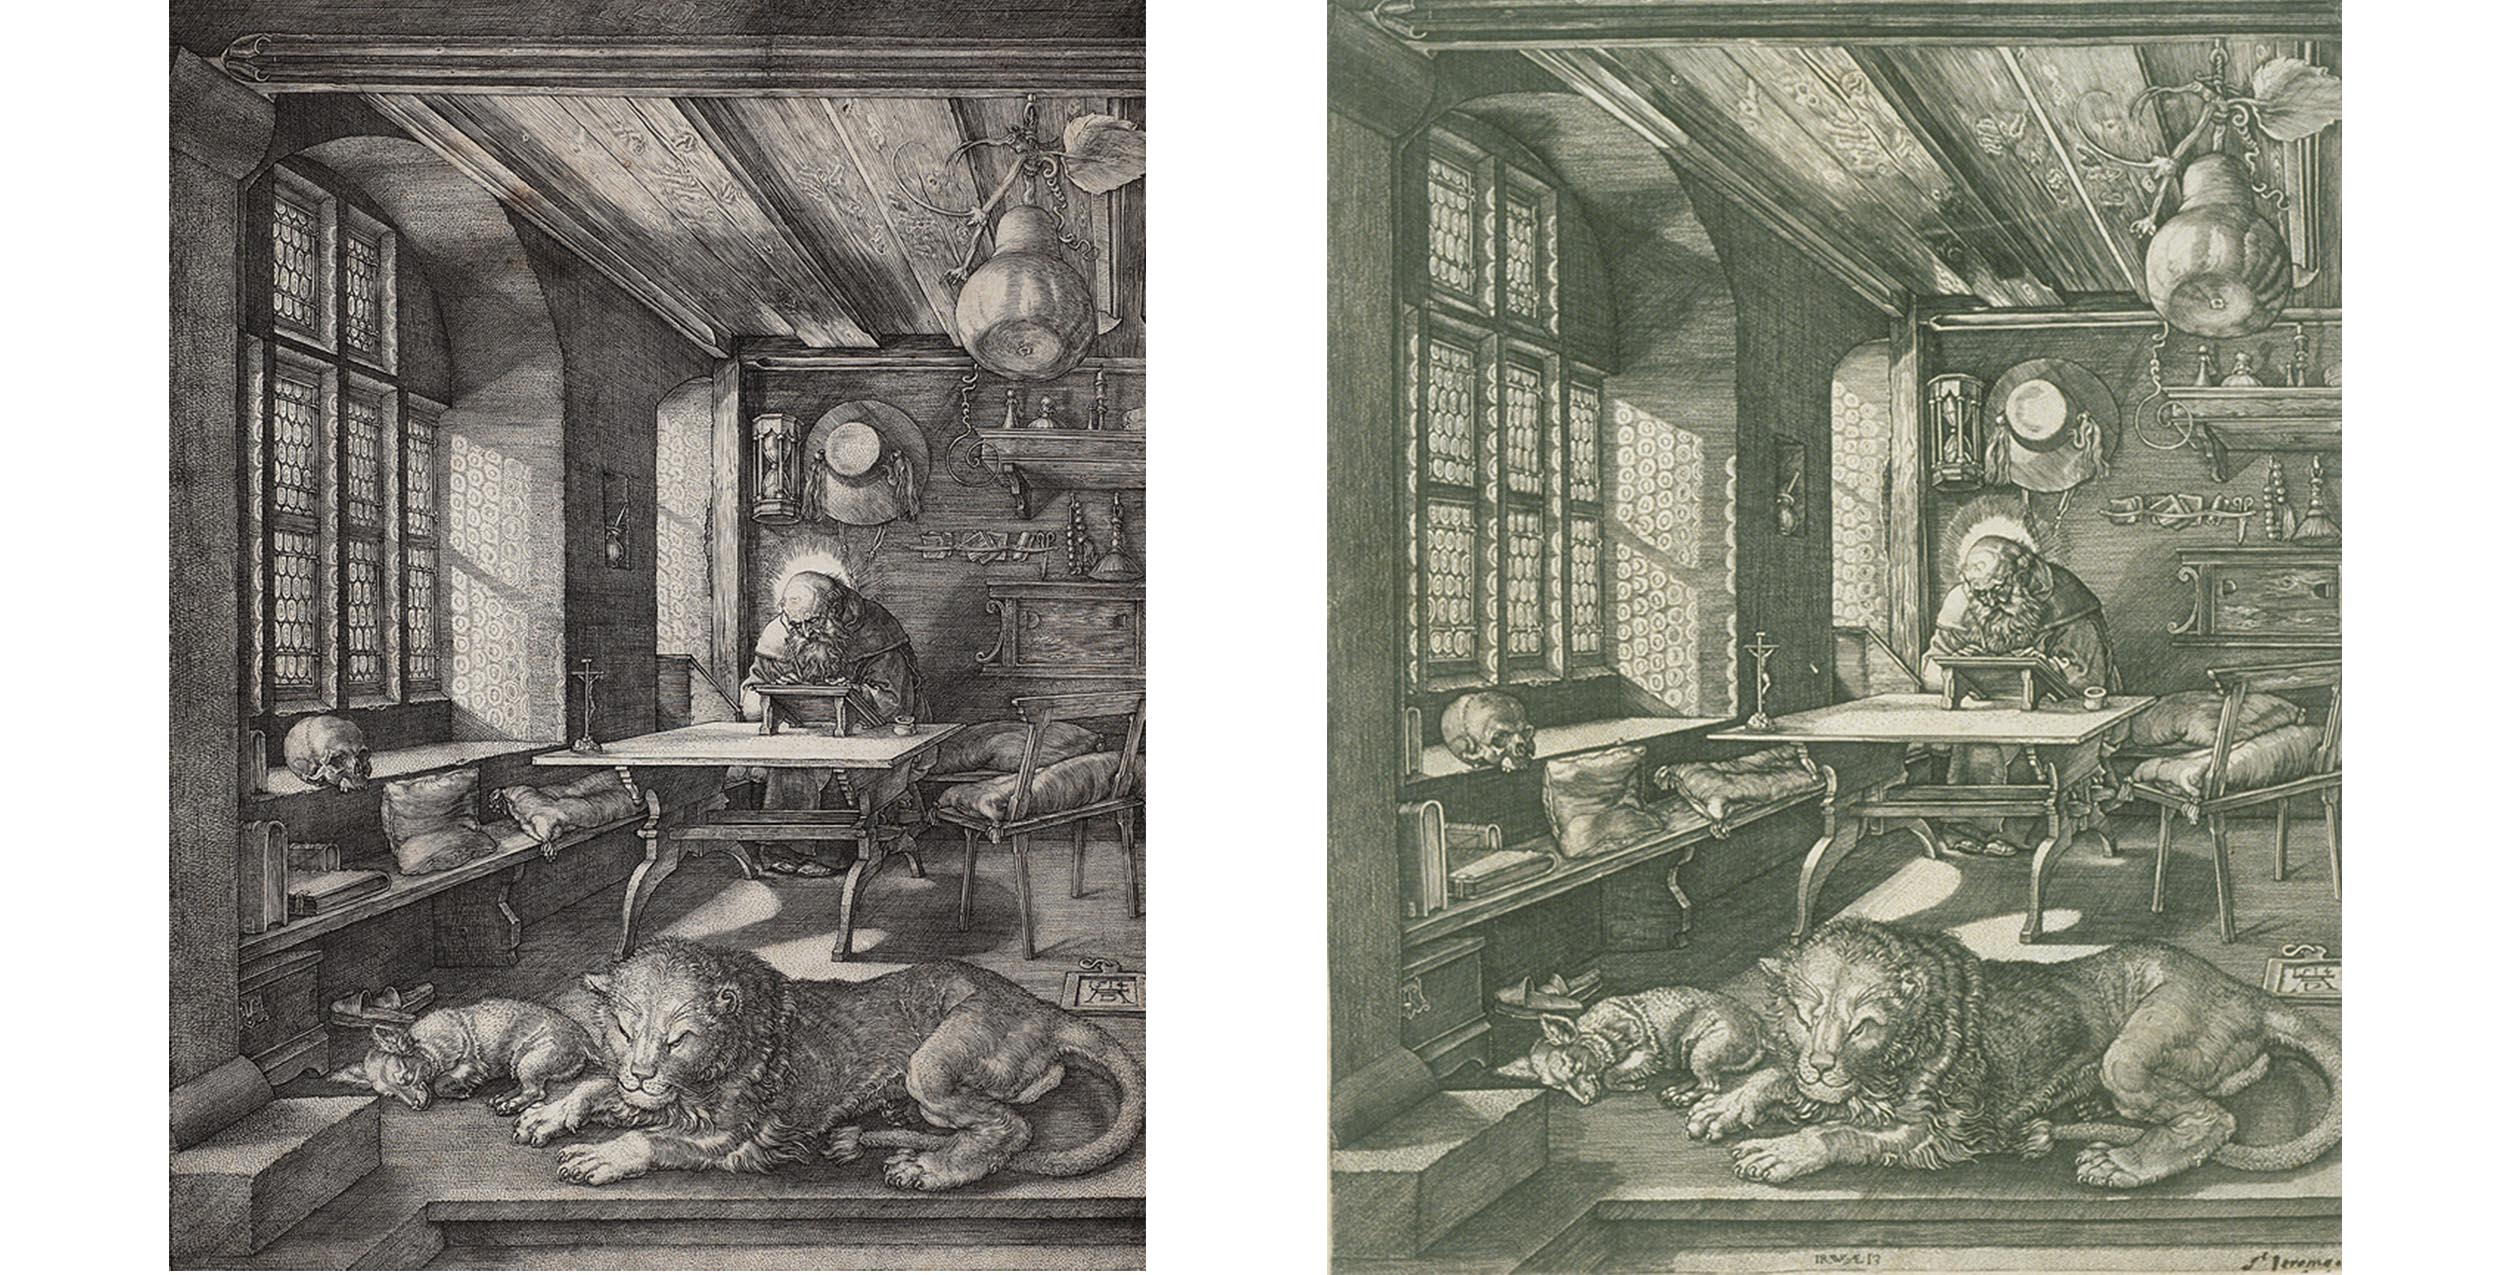 two prints side by side. both of them depict the following: man with halo at table writing in a book; figure of crucified Christ on corner of table, hour glass hanging on wall behind man; lion and dog sleeping in front of table; skull on window seat on left side of image